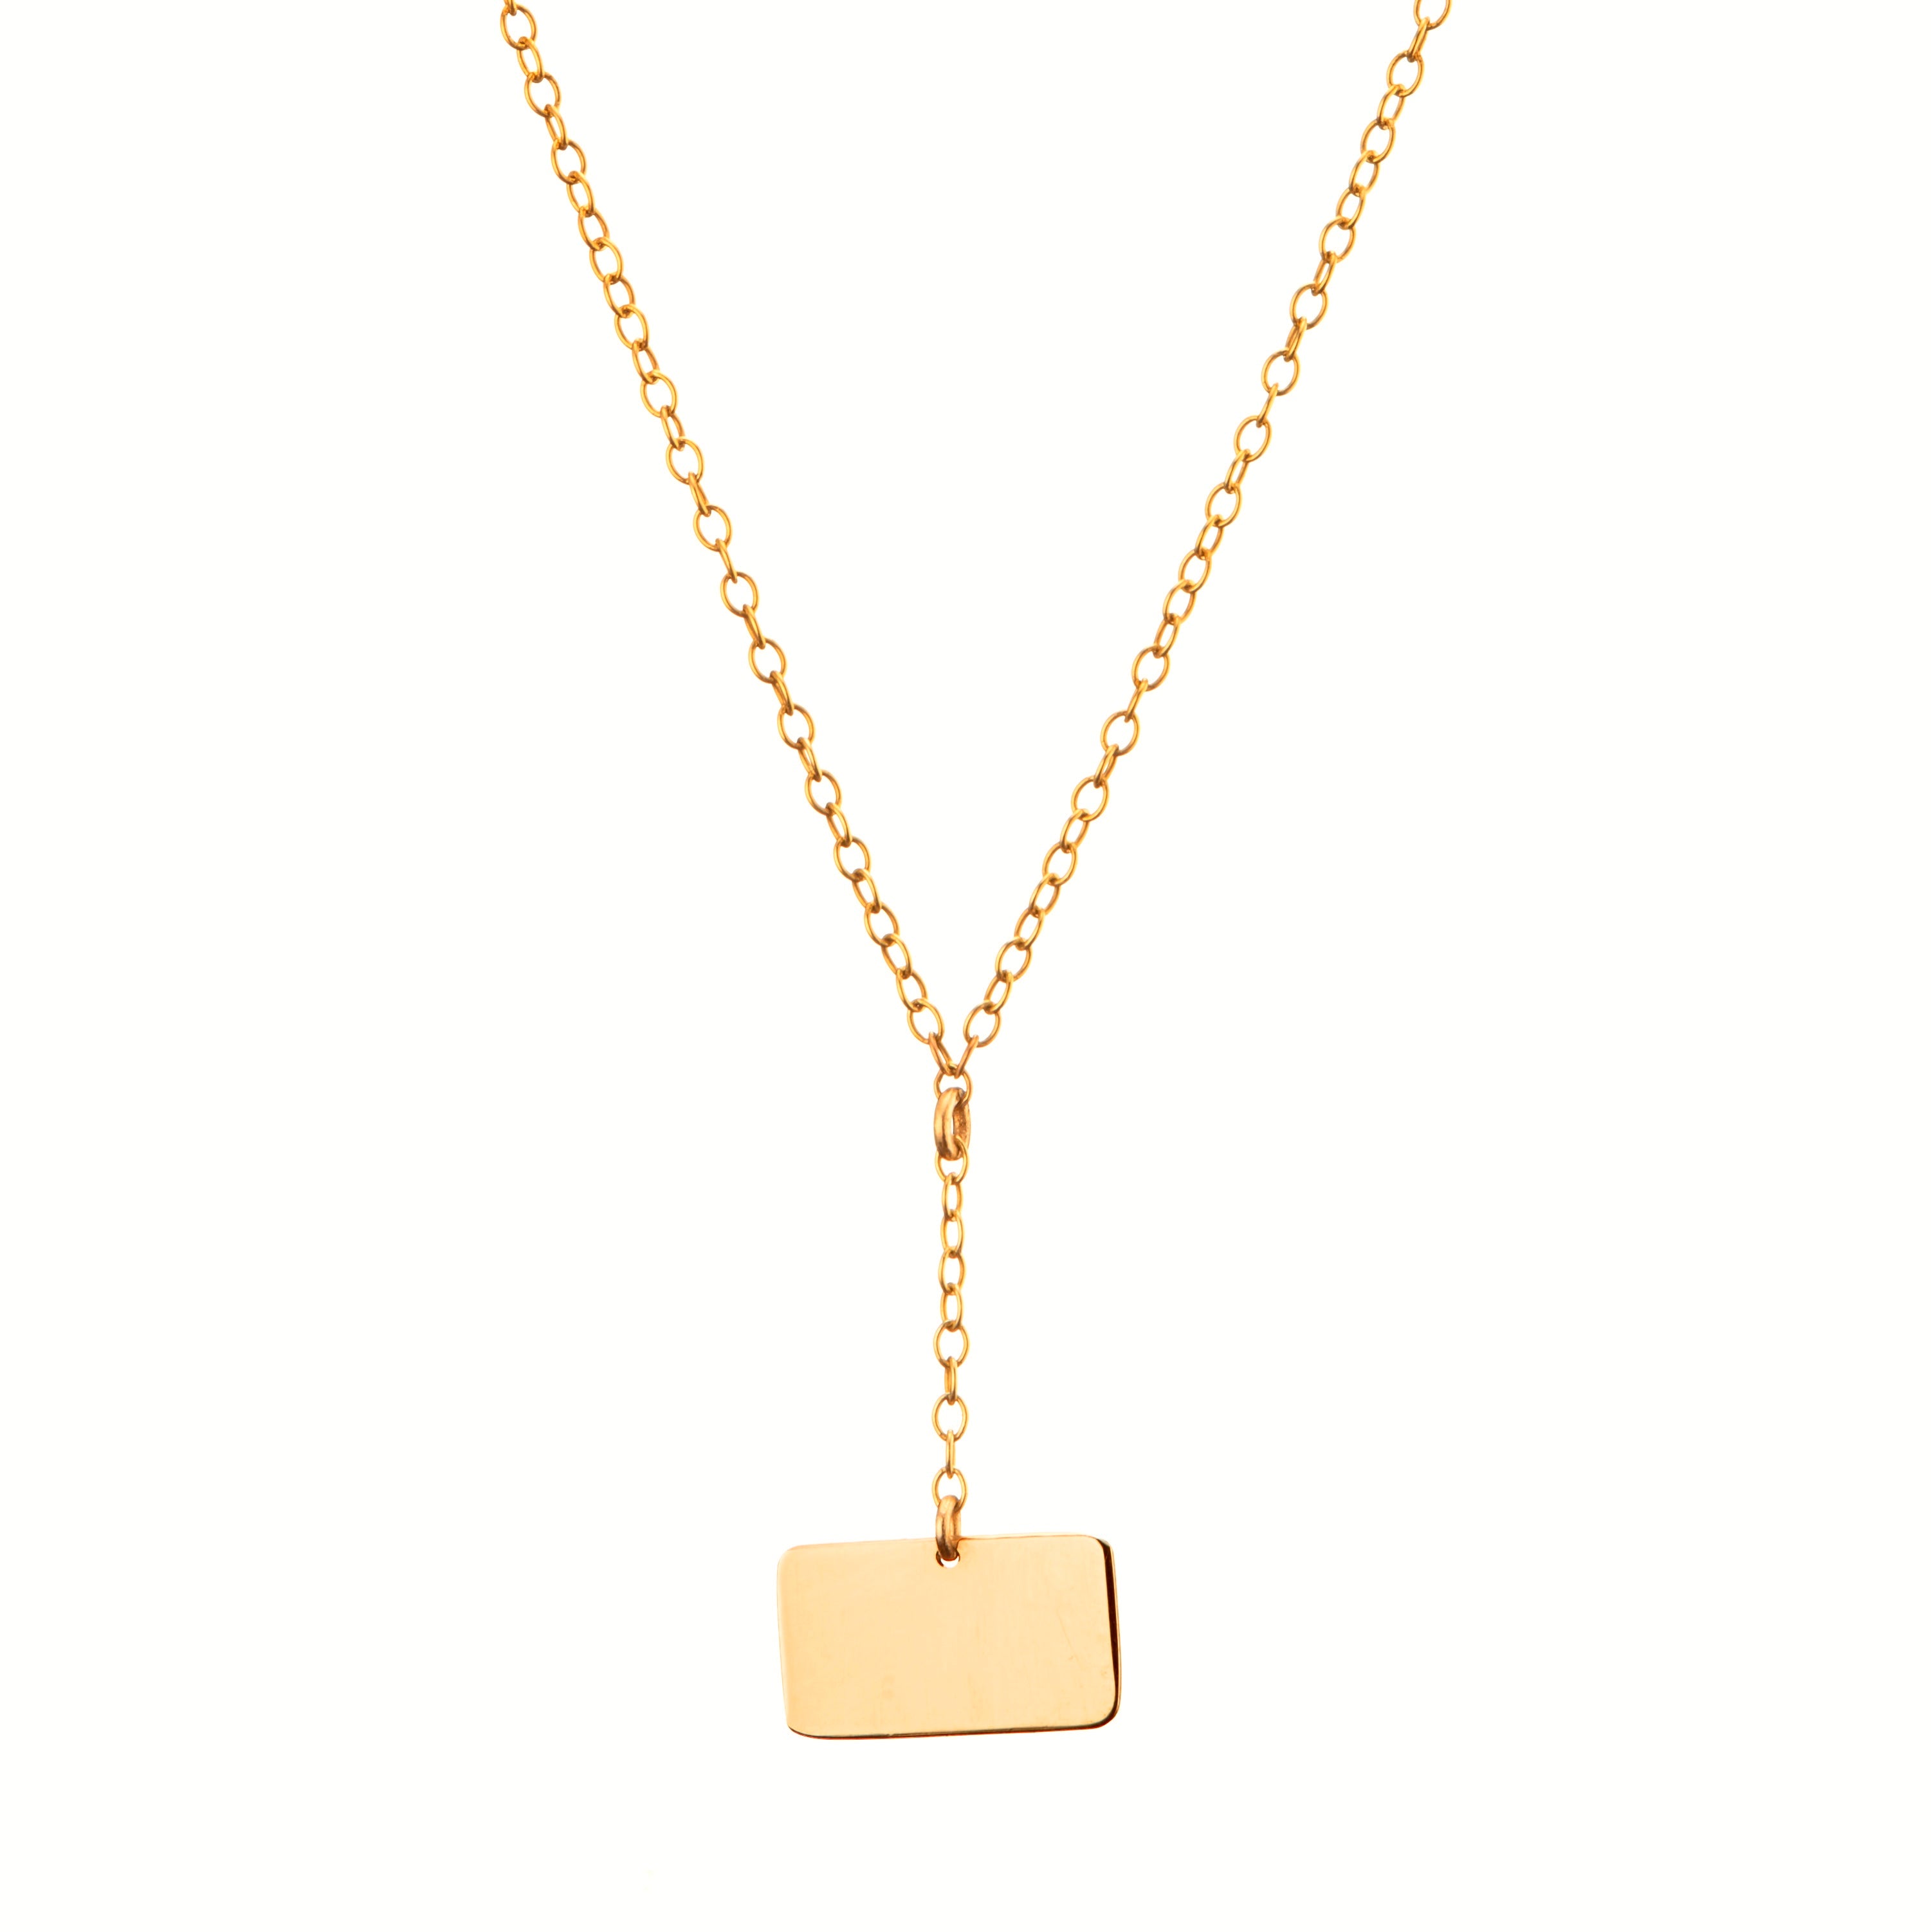 Slip Necklace - 18ct Gold